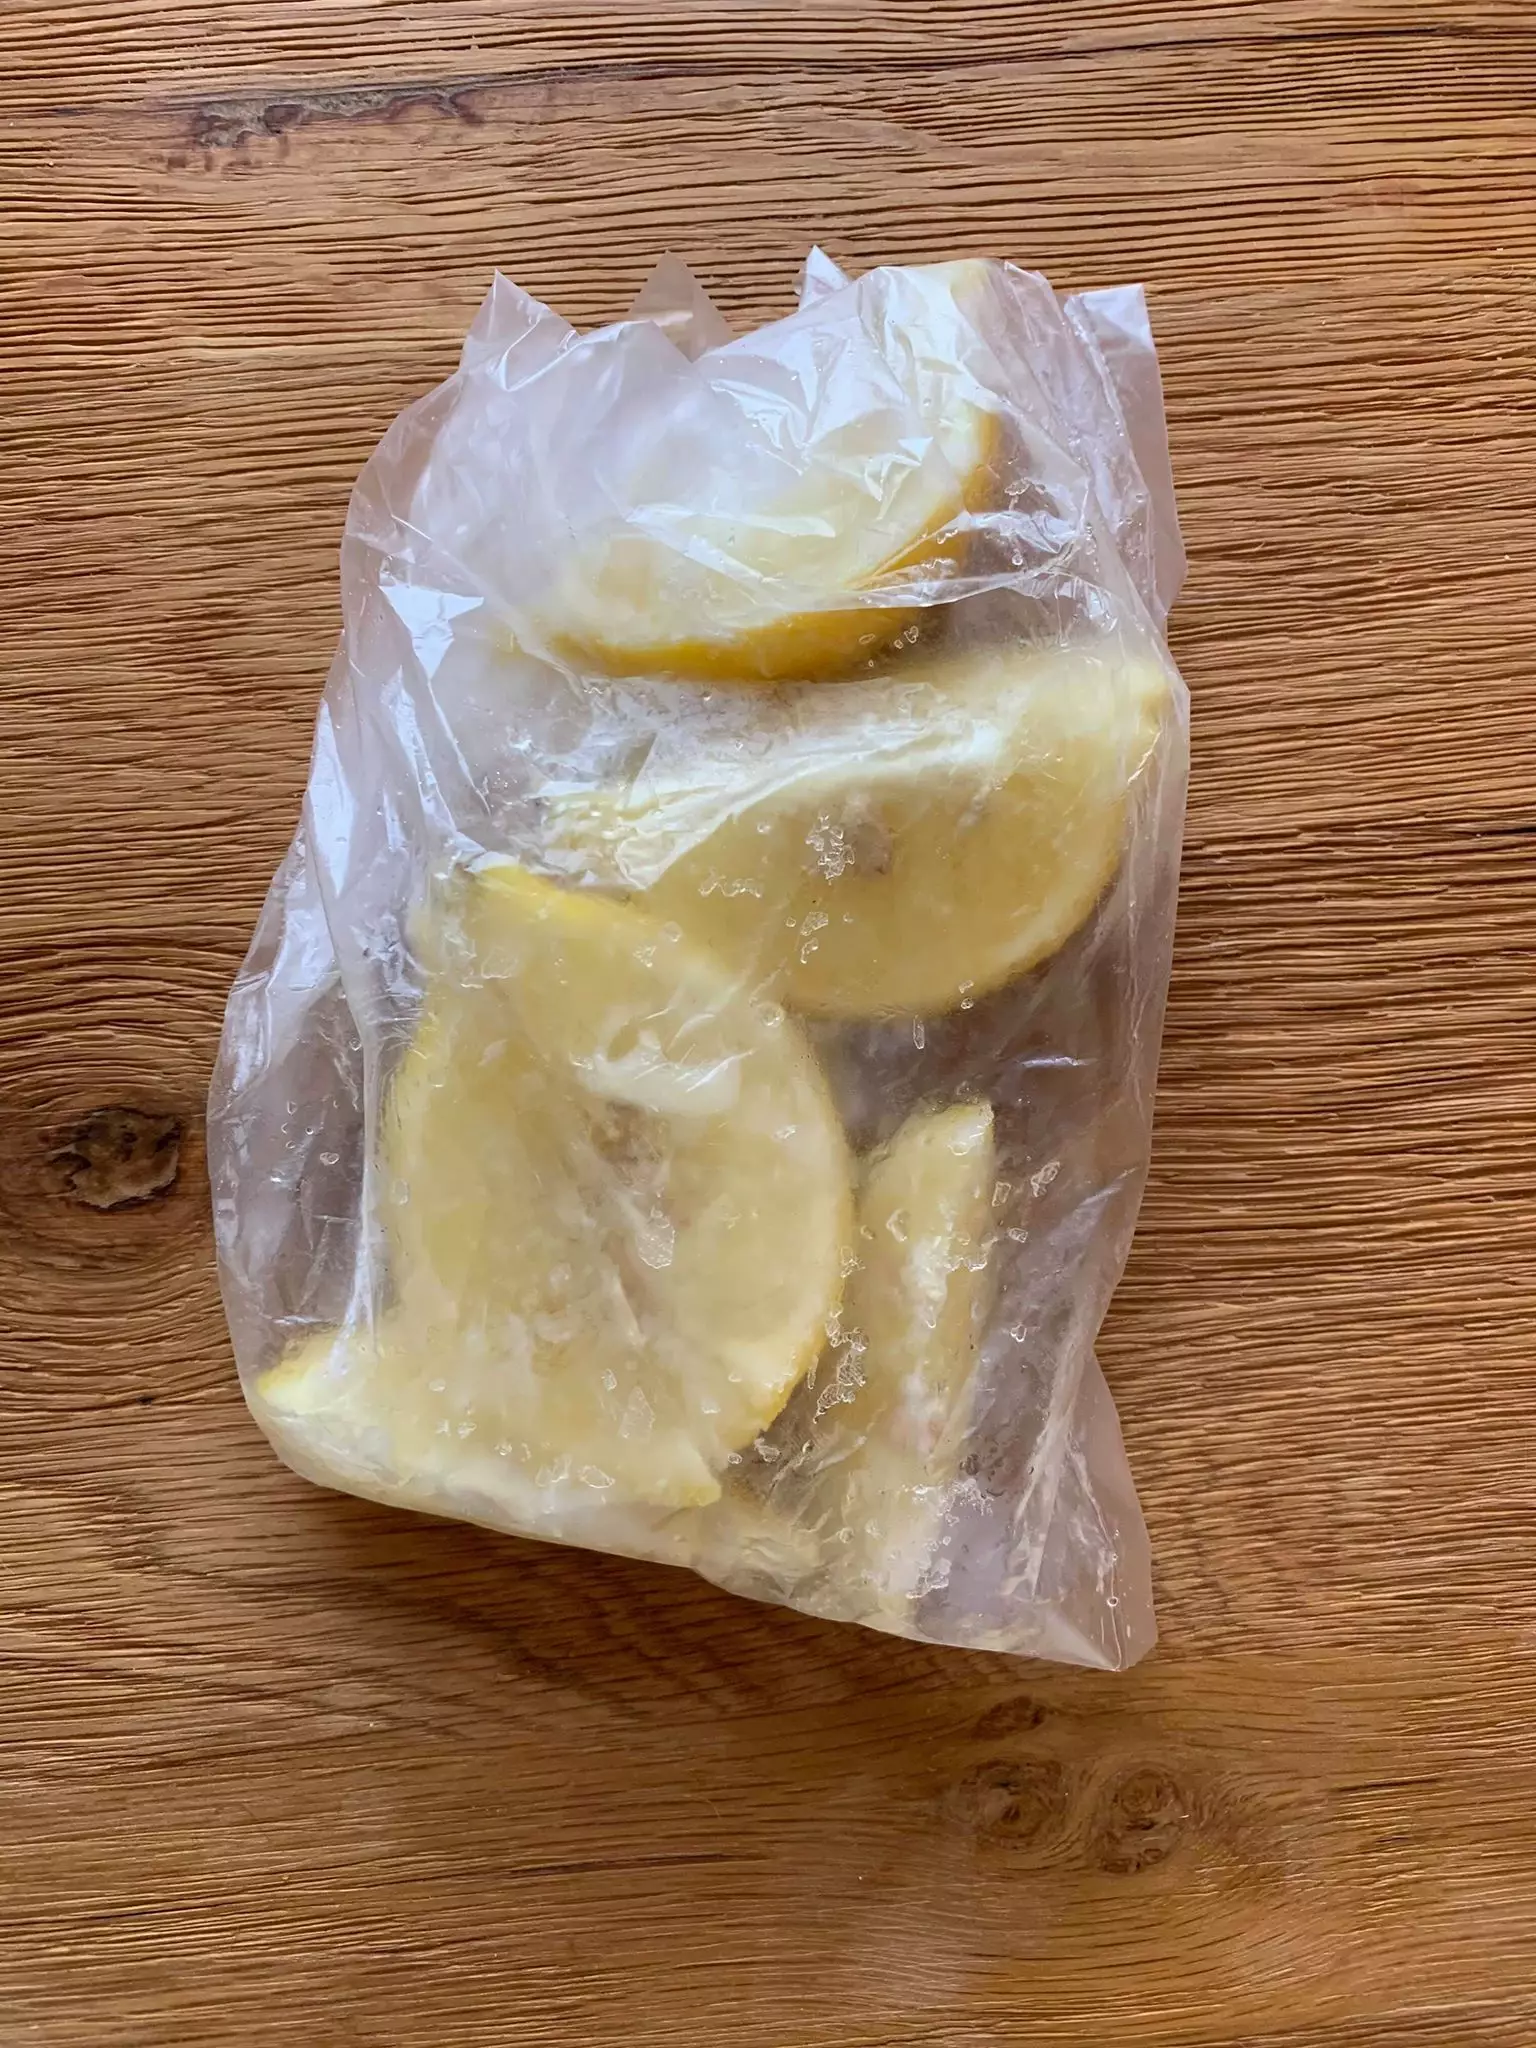 People are simply slicing their lemon and lime and freezing them to make fruit ice cubes (